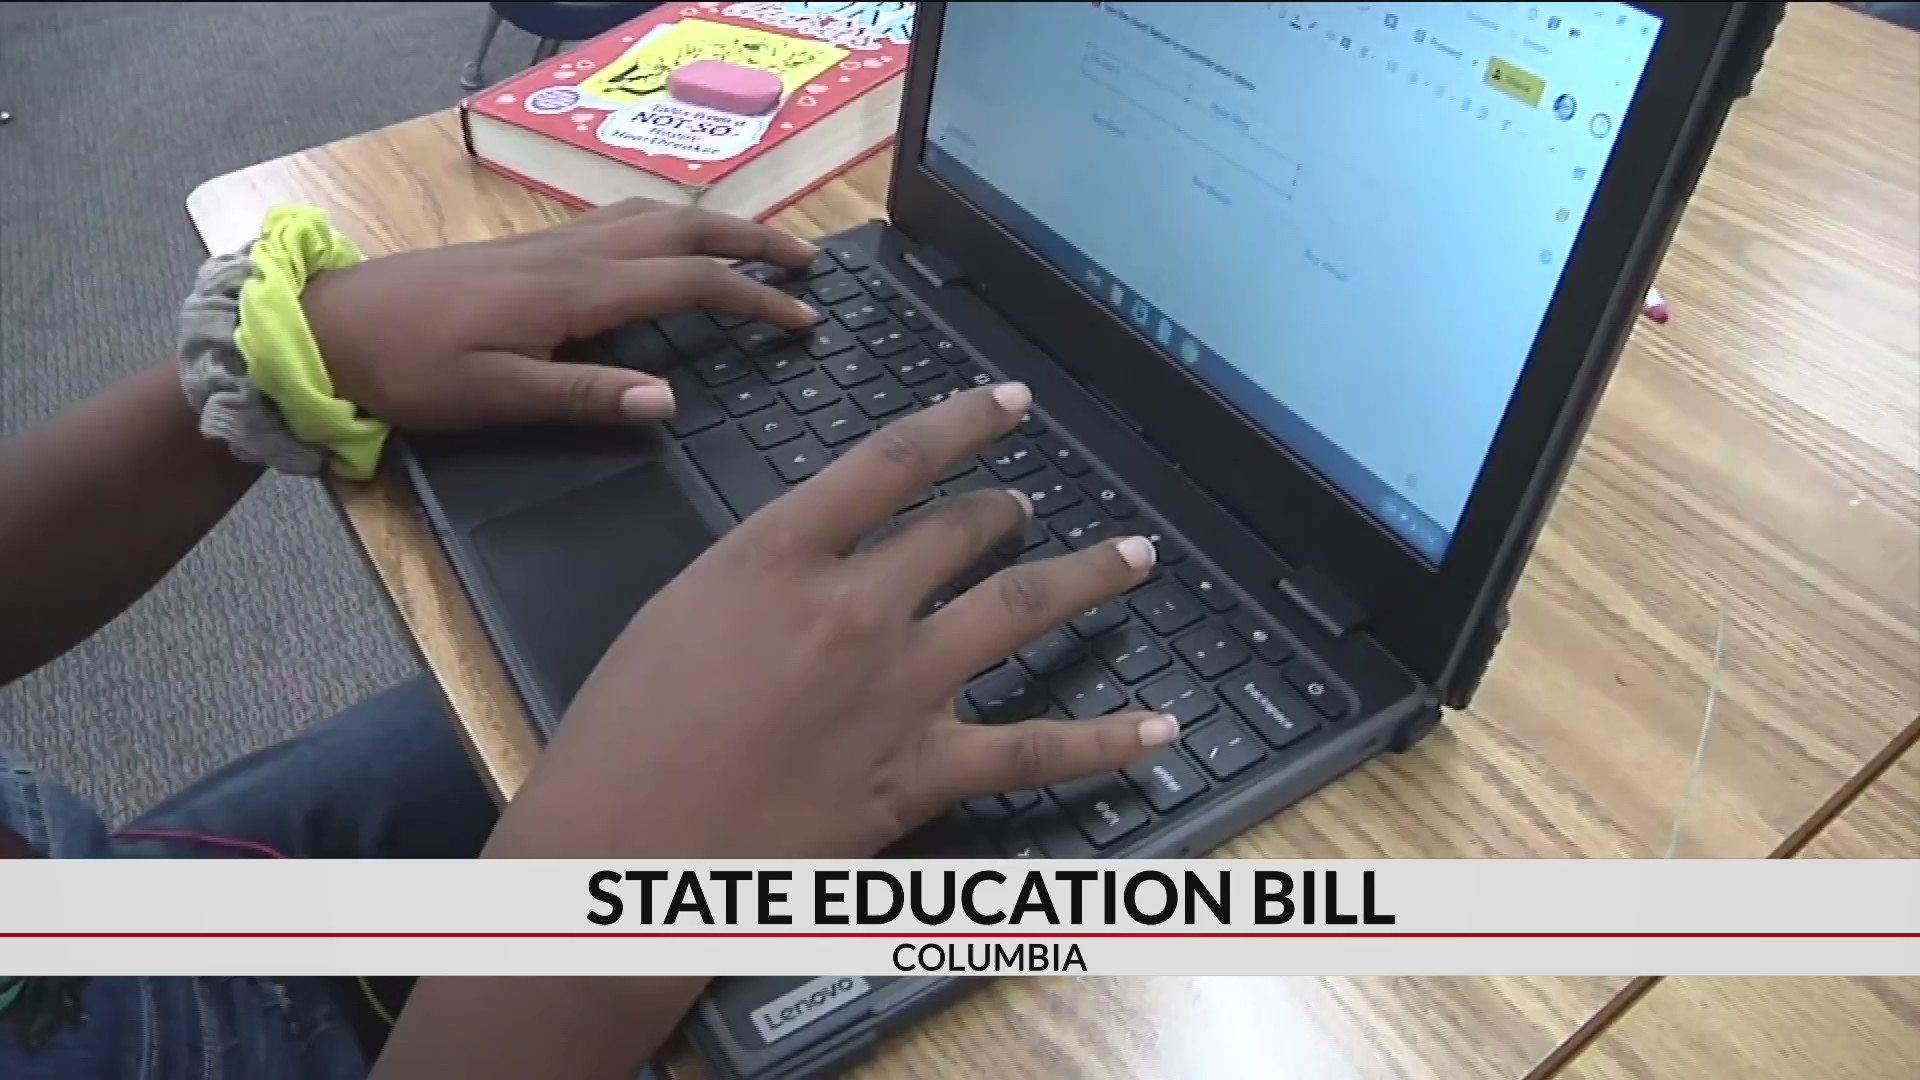 Thumbnail for the video titled "SC lawmakers face opposition as education bills move through State House"